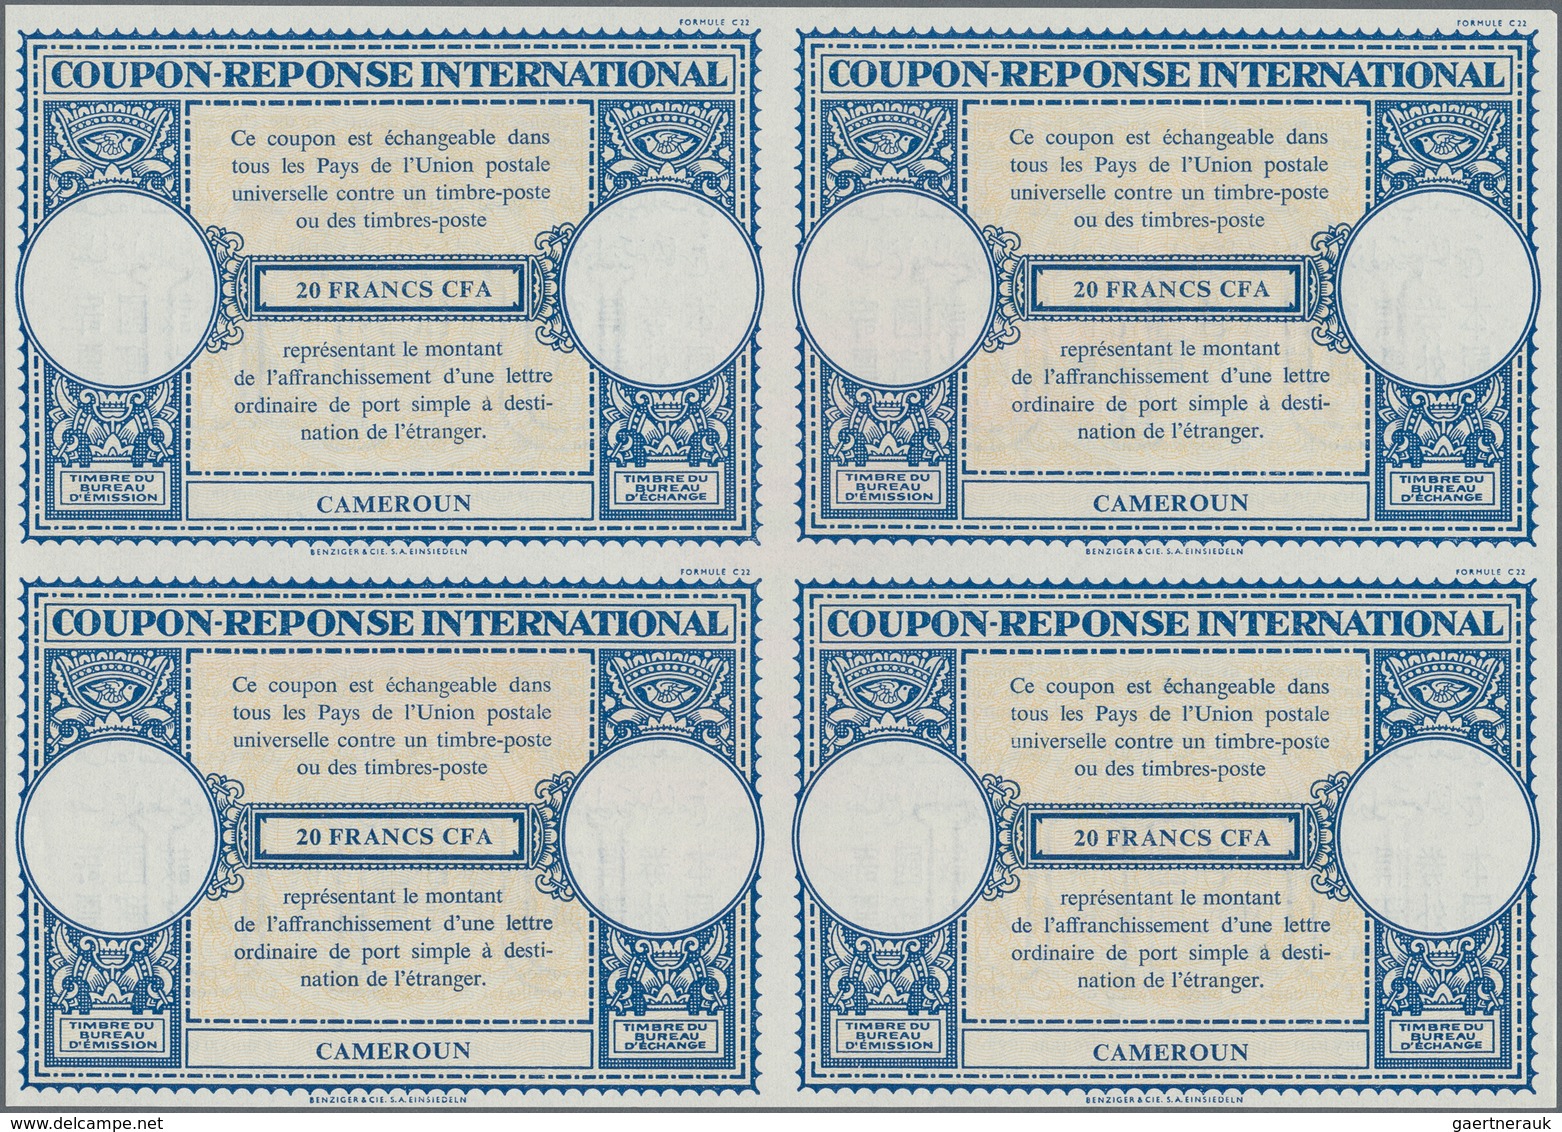 Kamerun: 1954. International Reply Coupon 20 Francs CFA (London Type) In An Unused Block Of 4. Issue - Cameroun (1960-...)